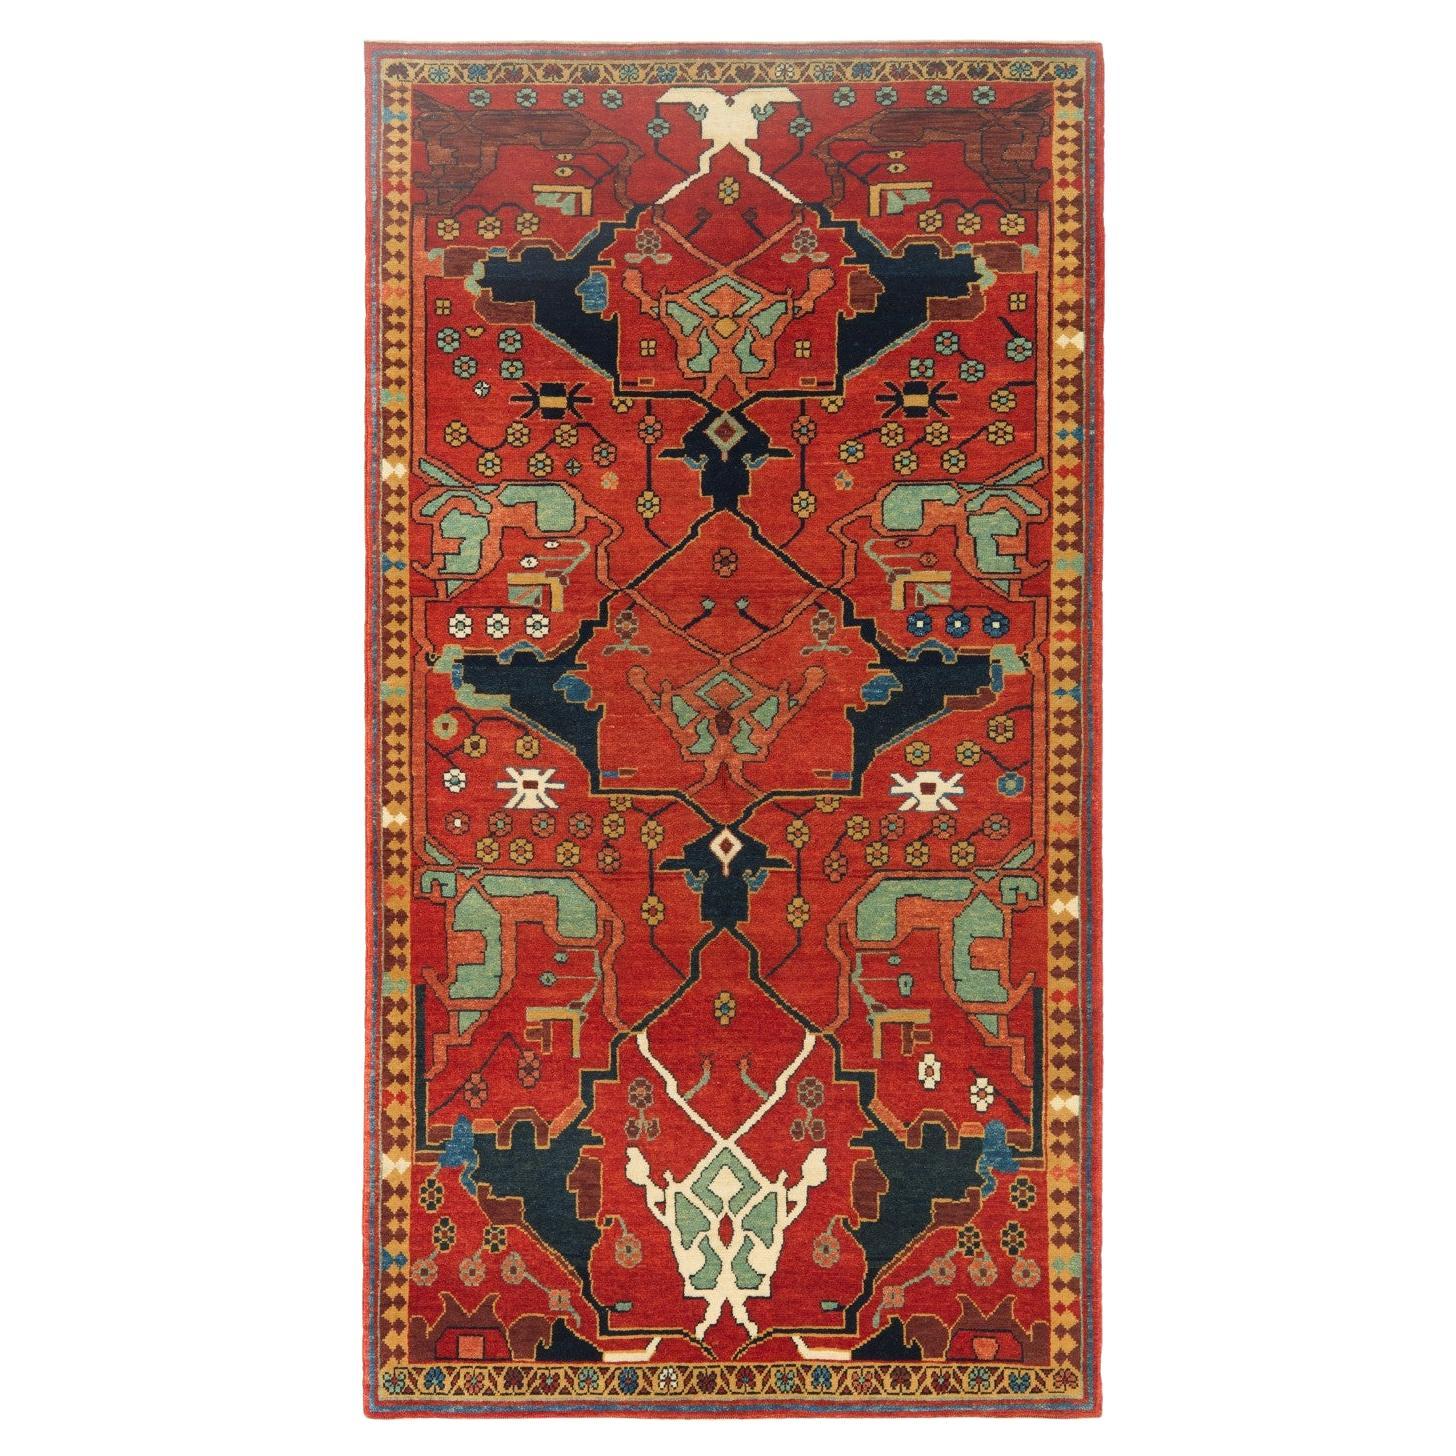 How can I spot an antique Persian rug?